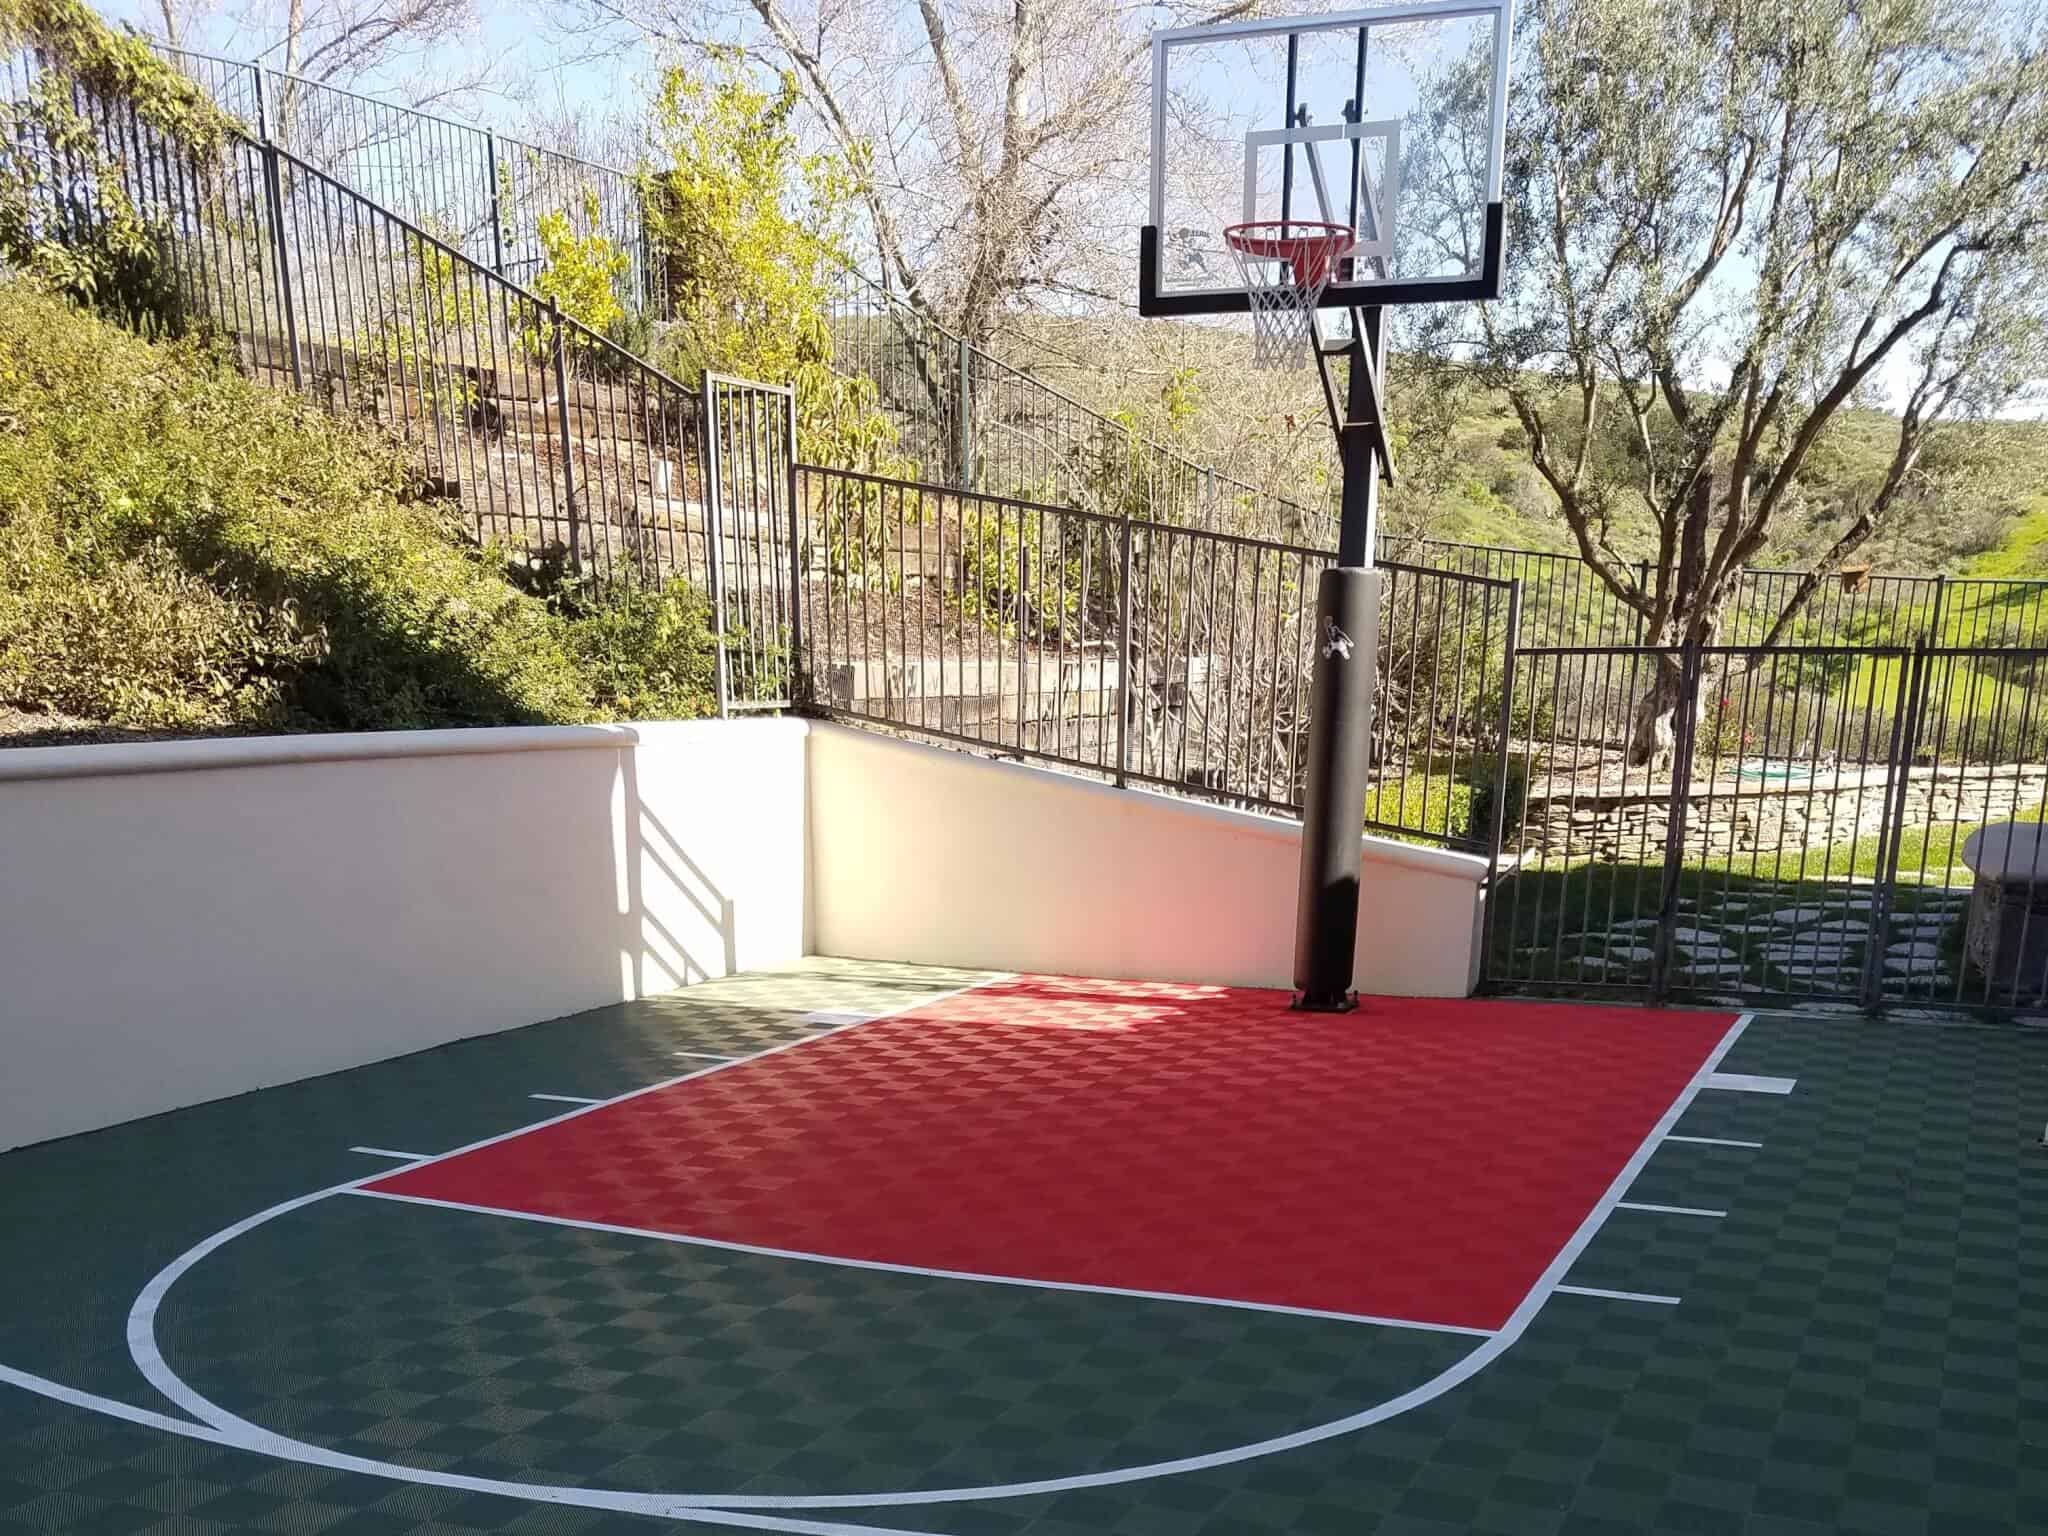 How To Build An Outdoor Basketball Court Floor